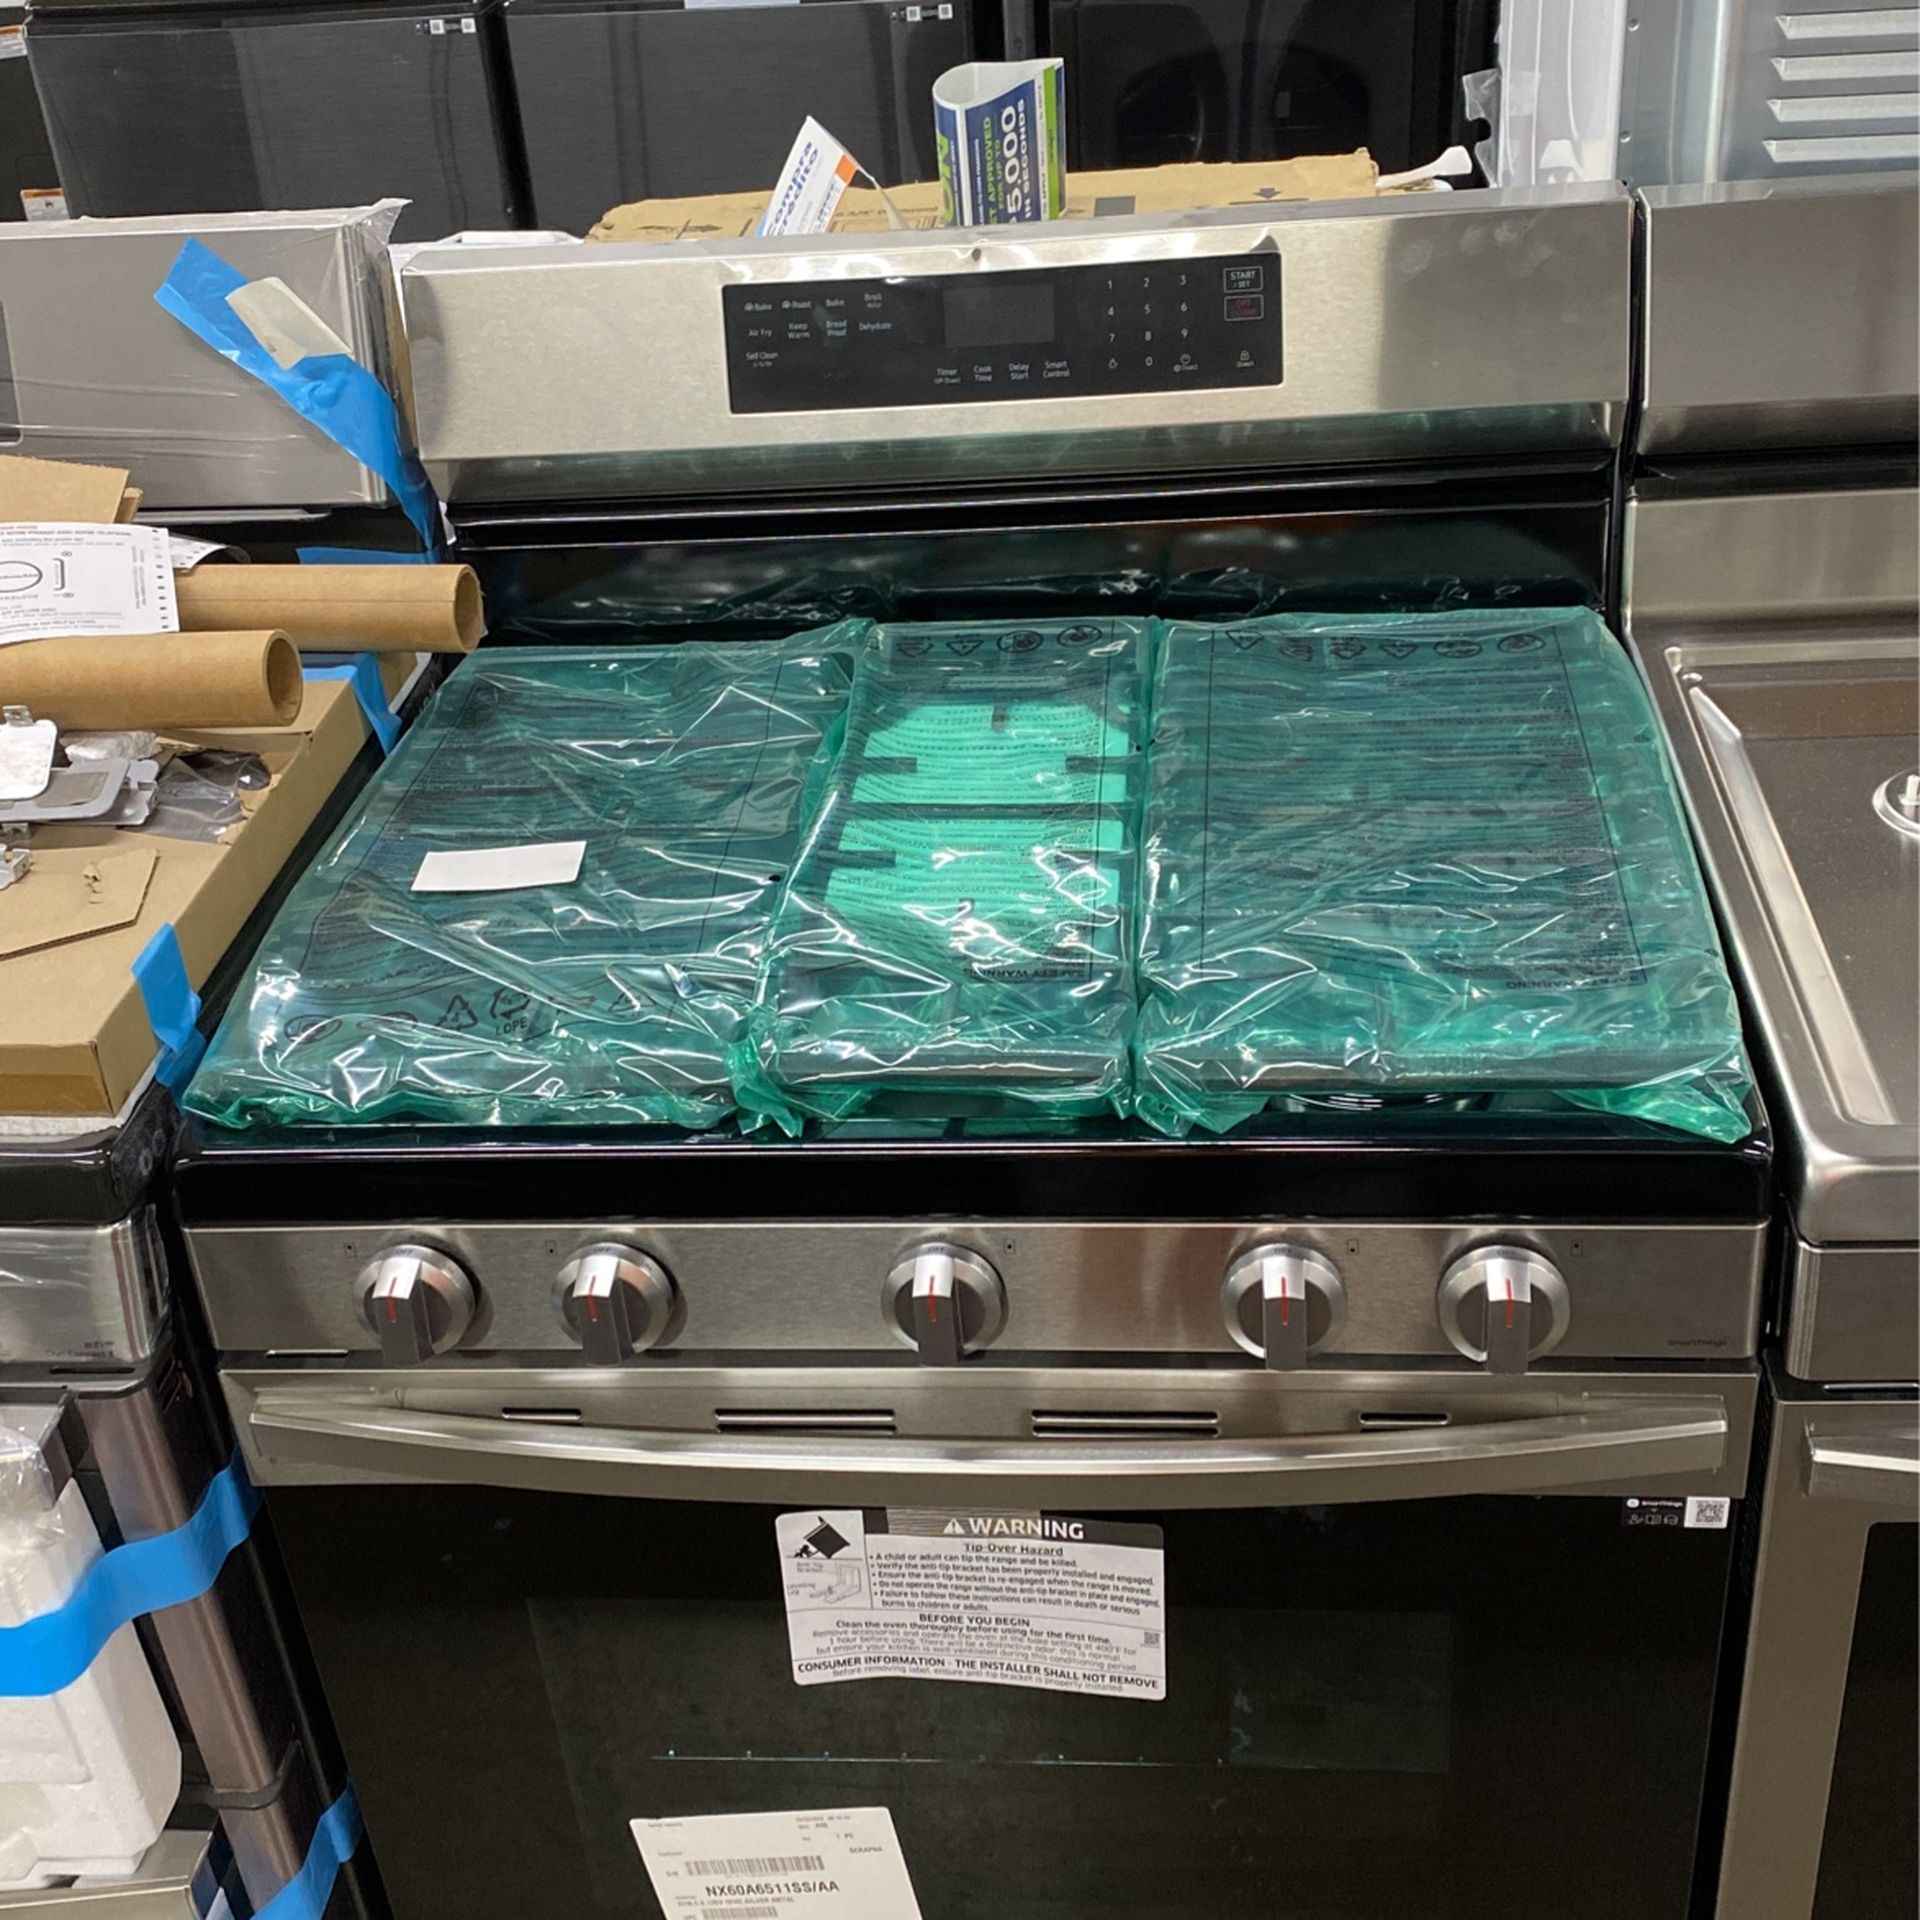 samsung stove 5 burners with air fryer brand new scratch and dents